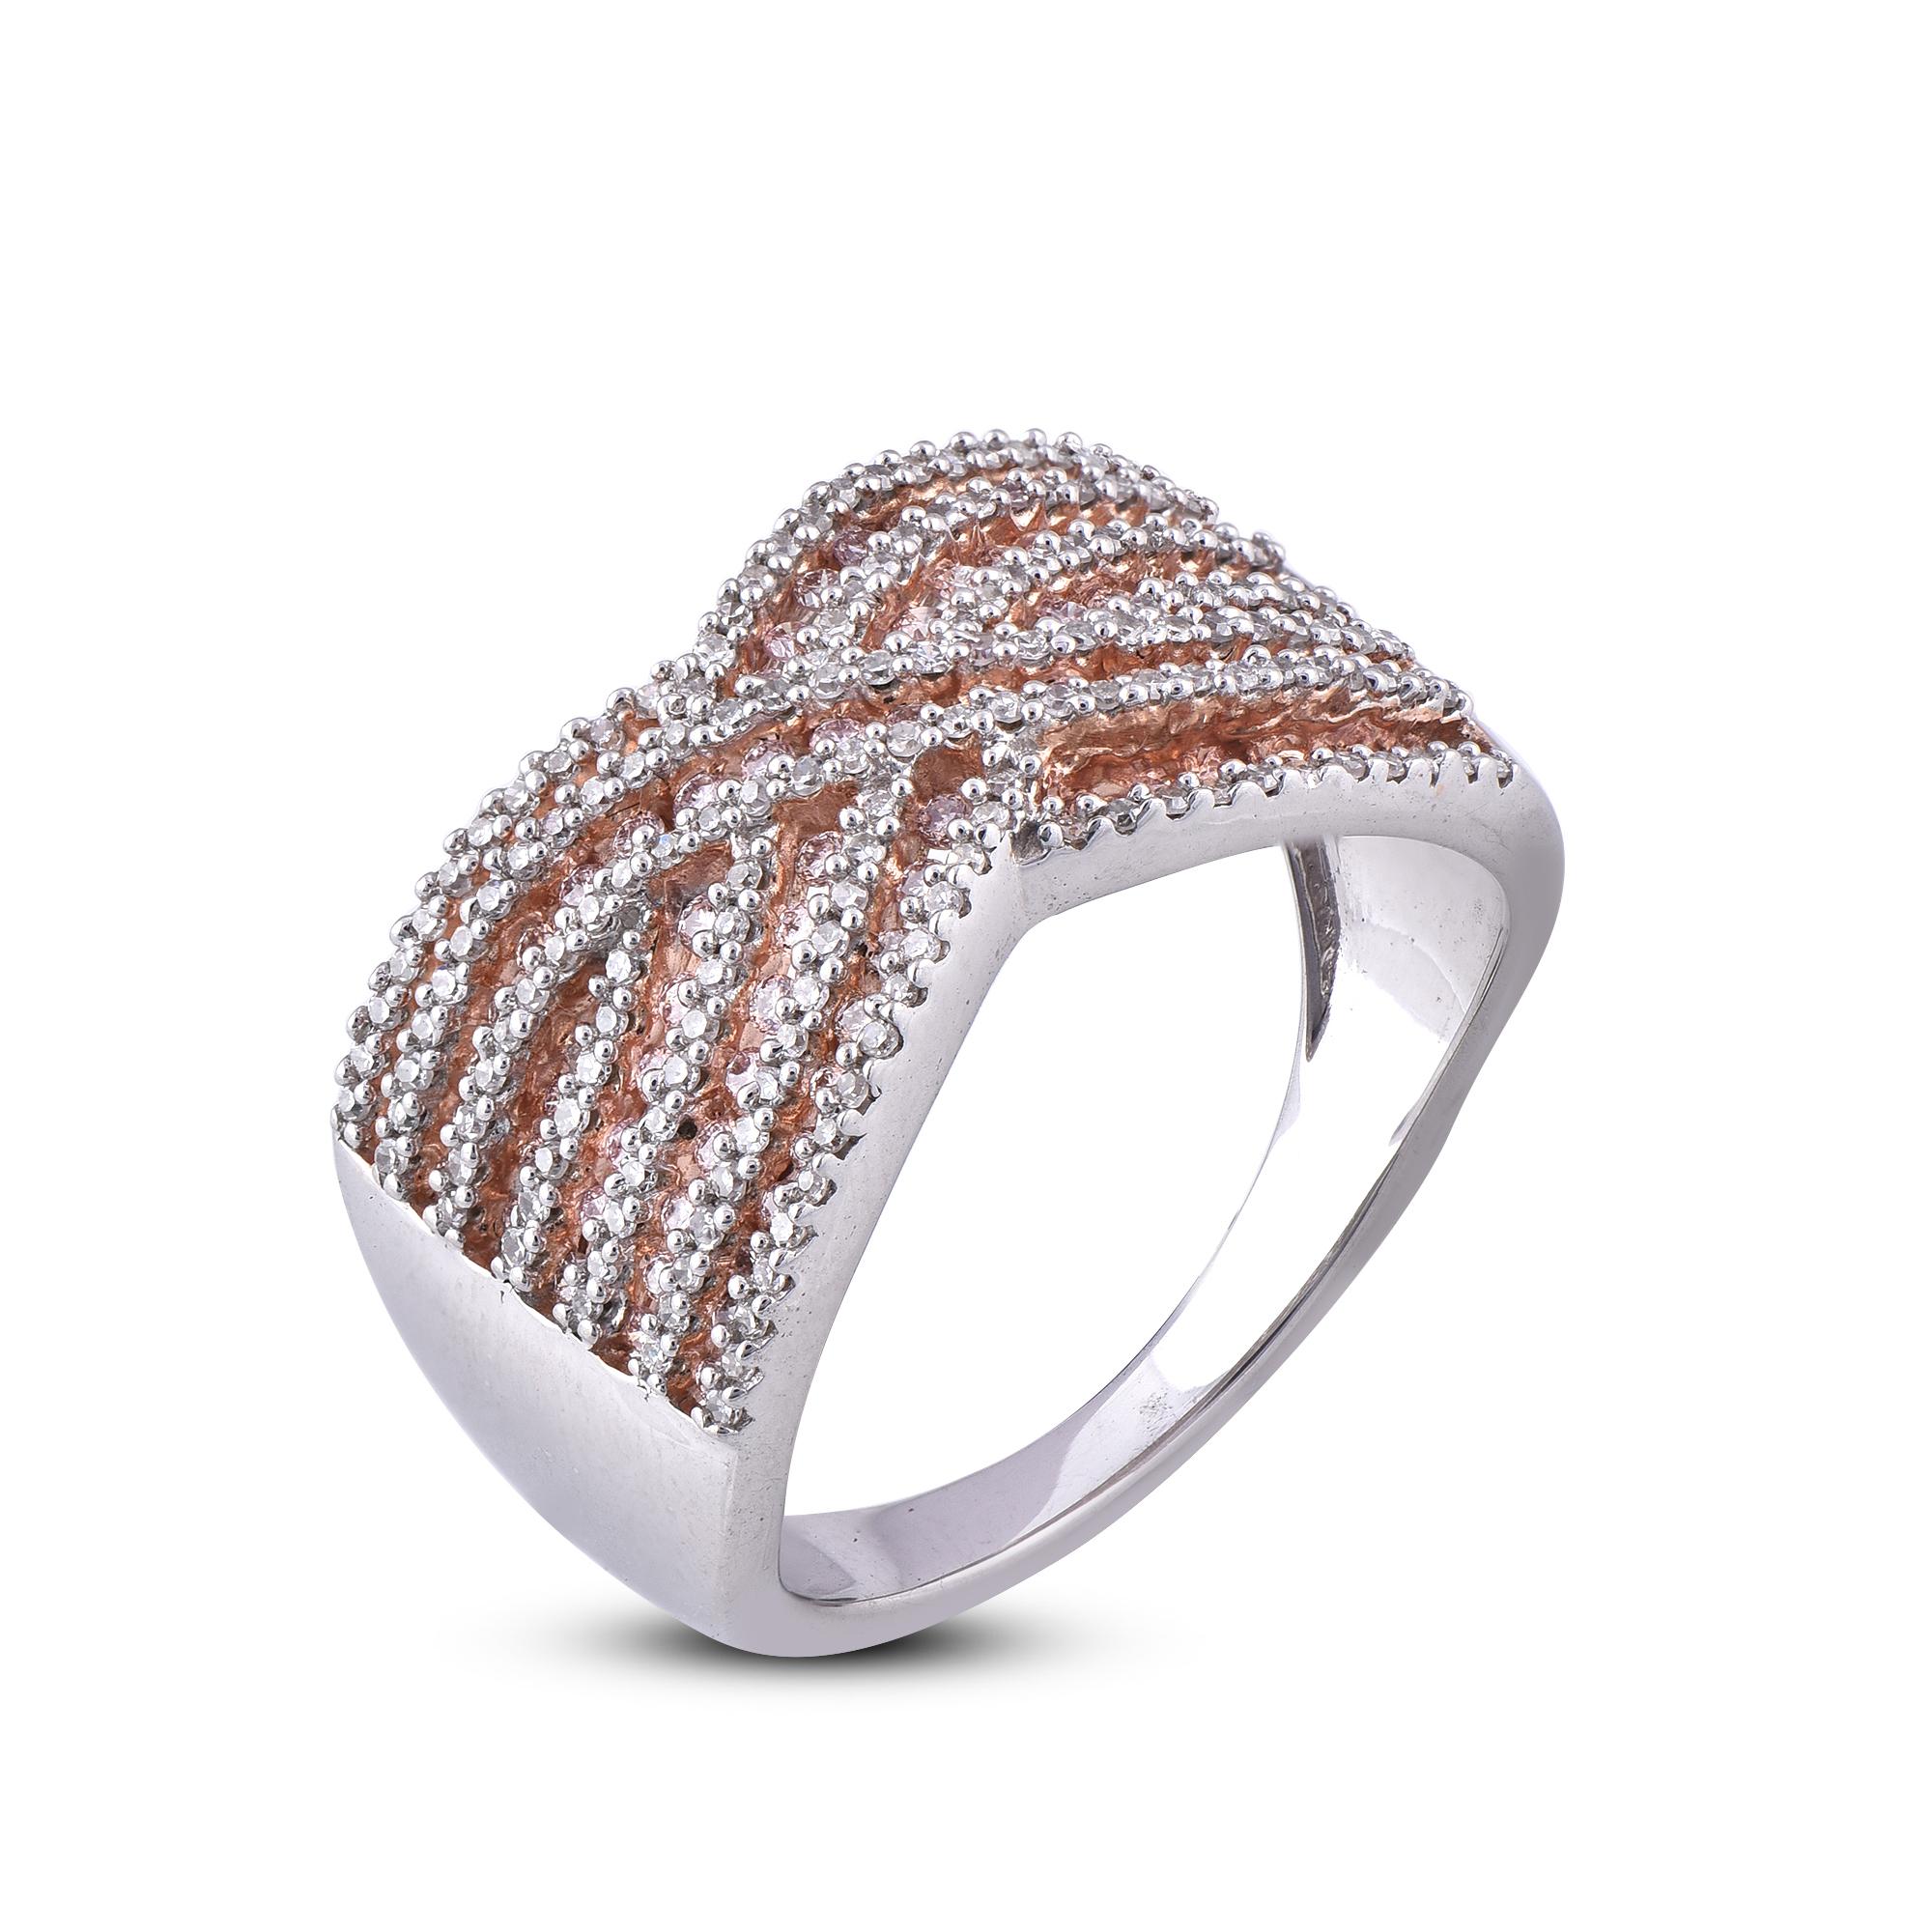 This Crisscross Diamond wedding band in 18K white gold showcases 0.86 carats of sparkling 168 round and 87 pink diamonds accentuated in prong and channel setting, H-I color I1 clarity. Featuring a crisscross design and a highly polished gold finish,